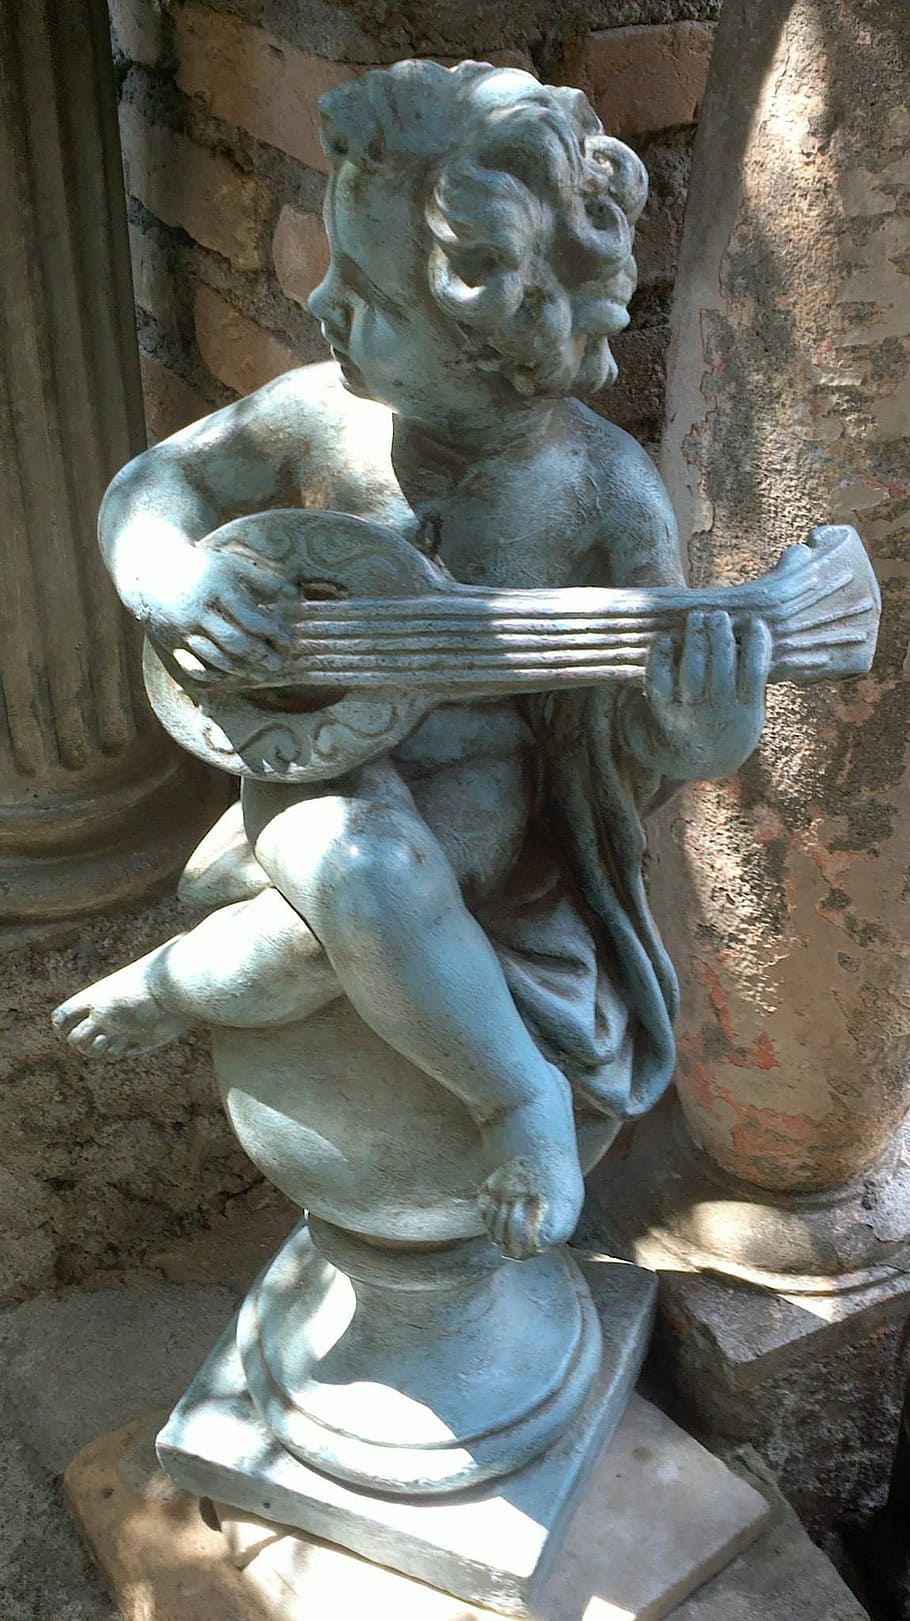 Cherub, Lute, Statue, Cupid, playing, angel, sculpture, art and craft